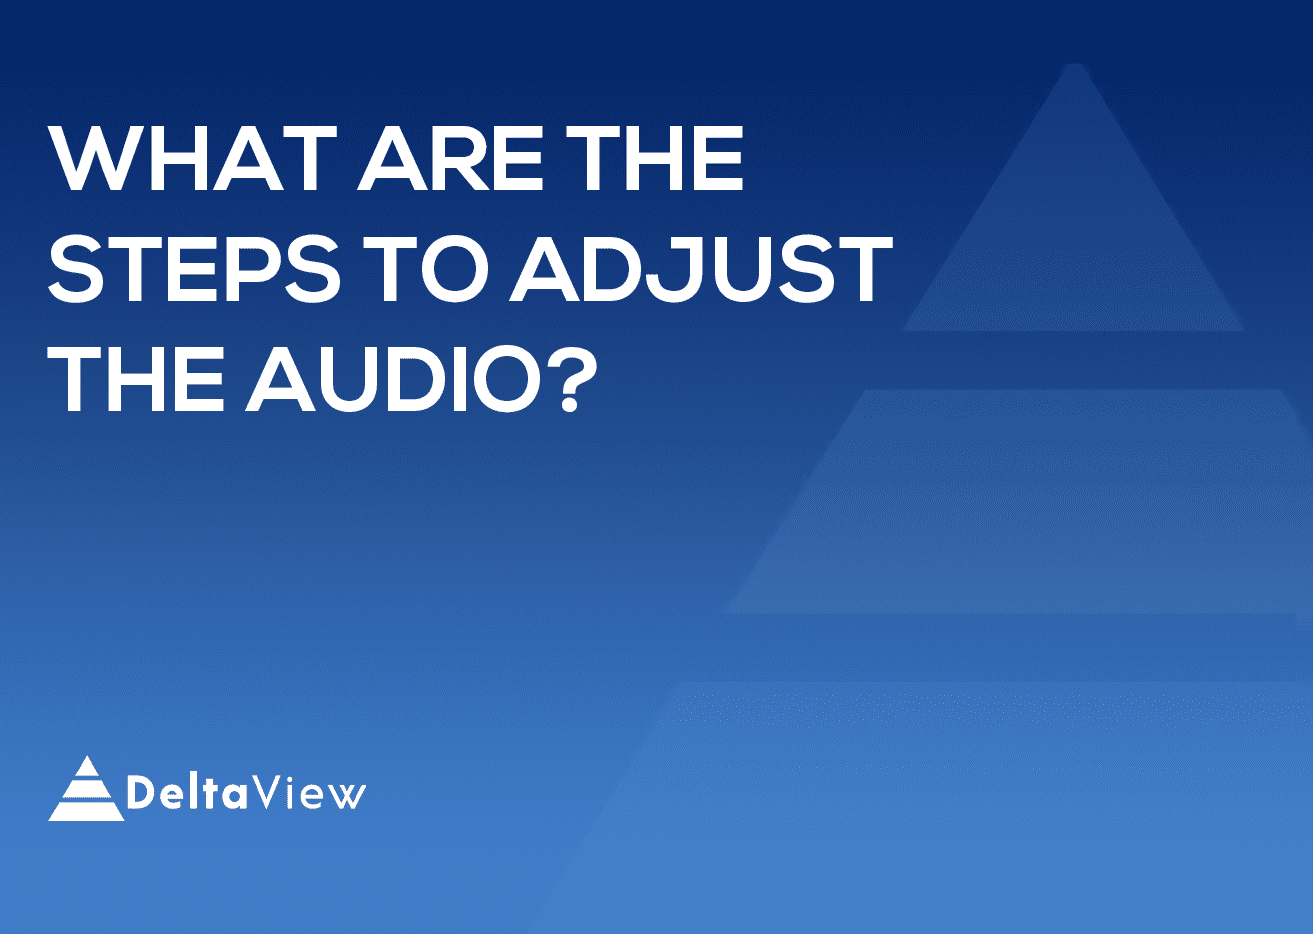 What are the steps to adjust the audio?